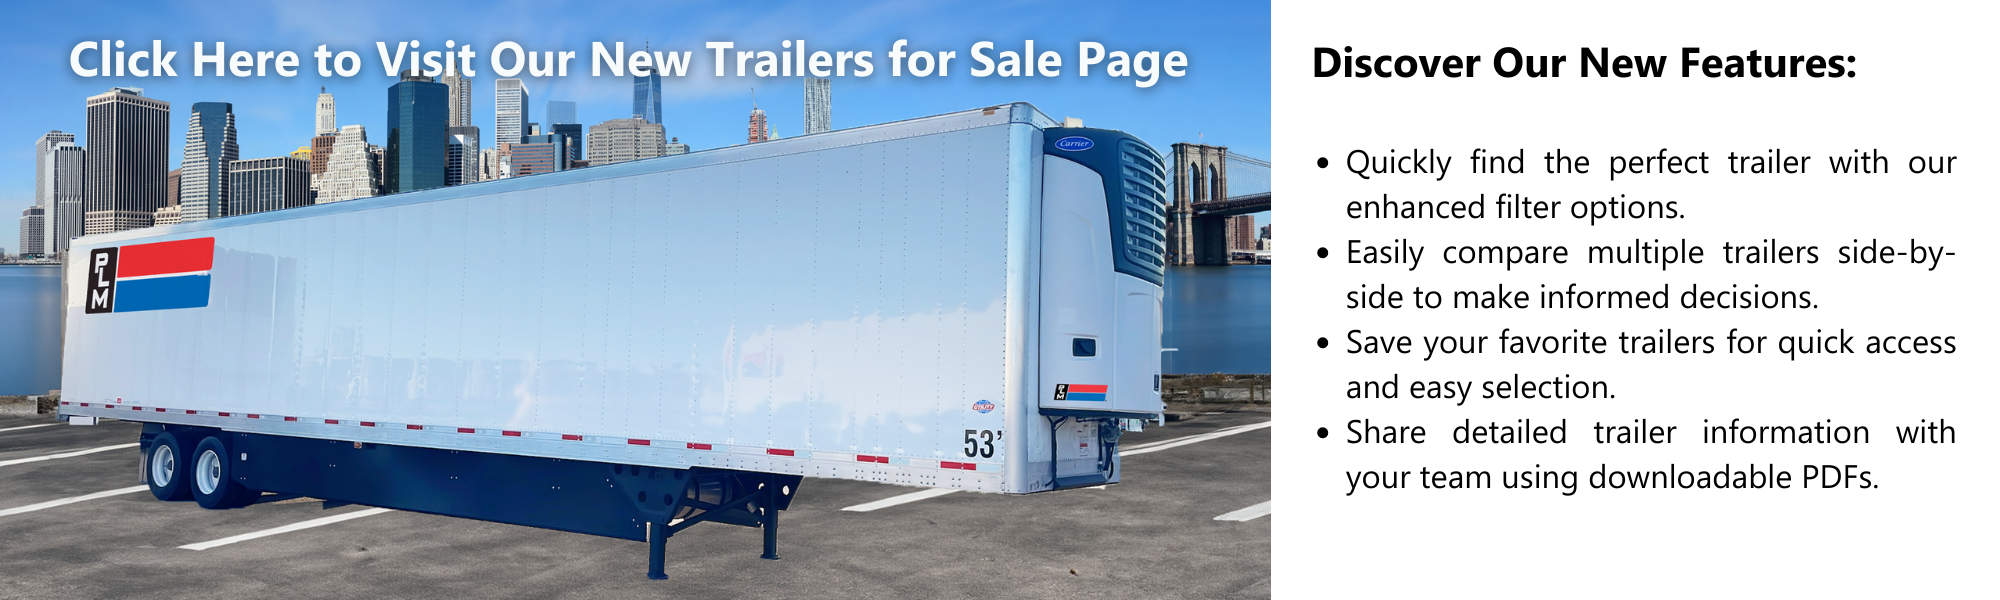 Trailers for Sale page